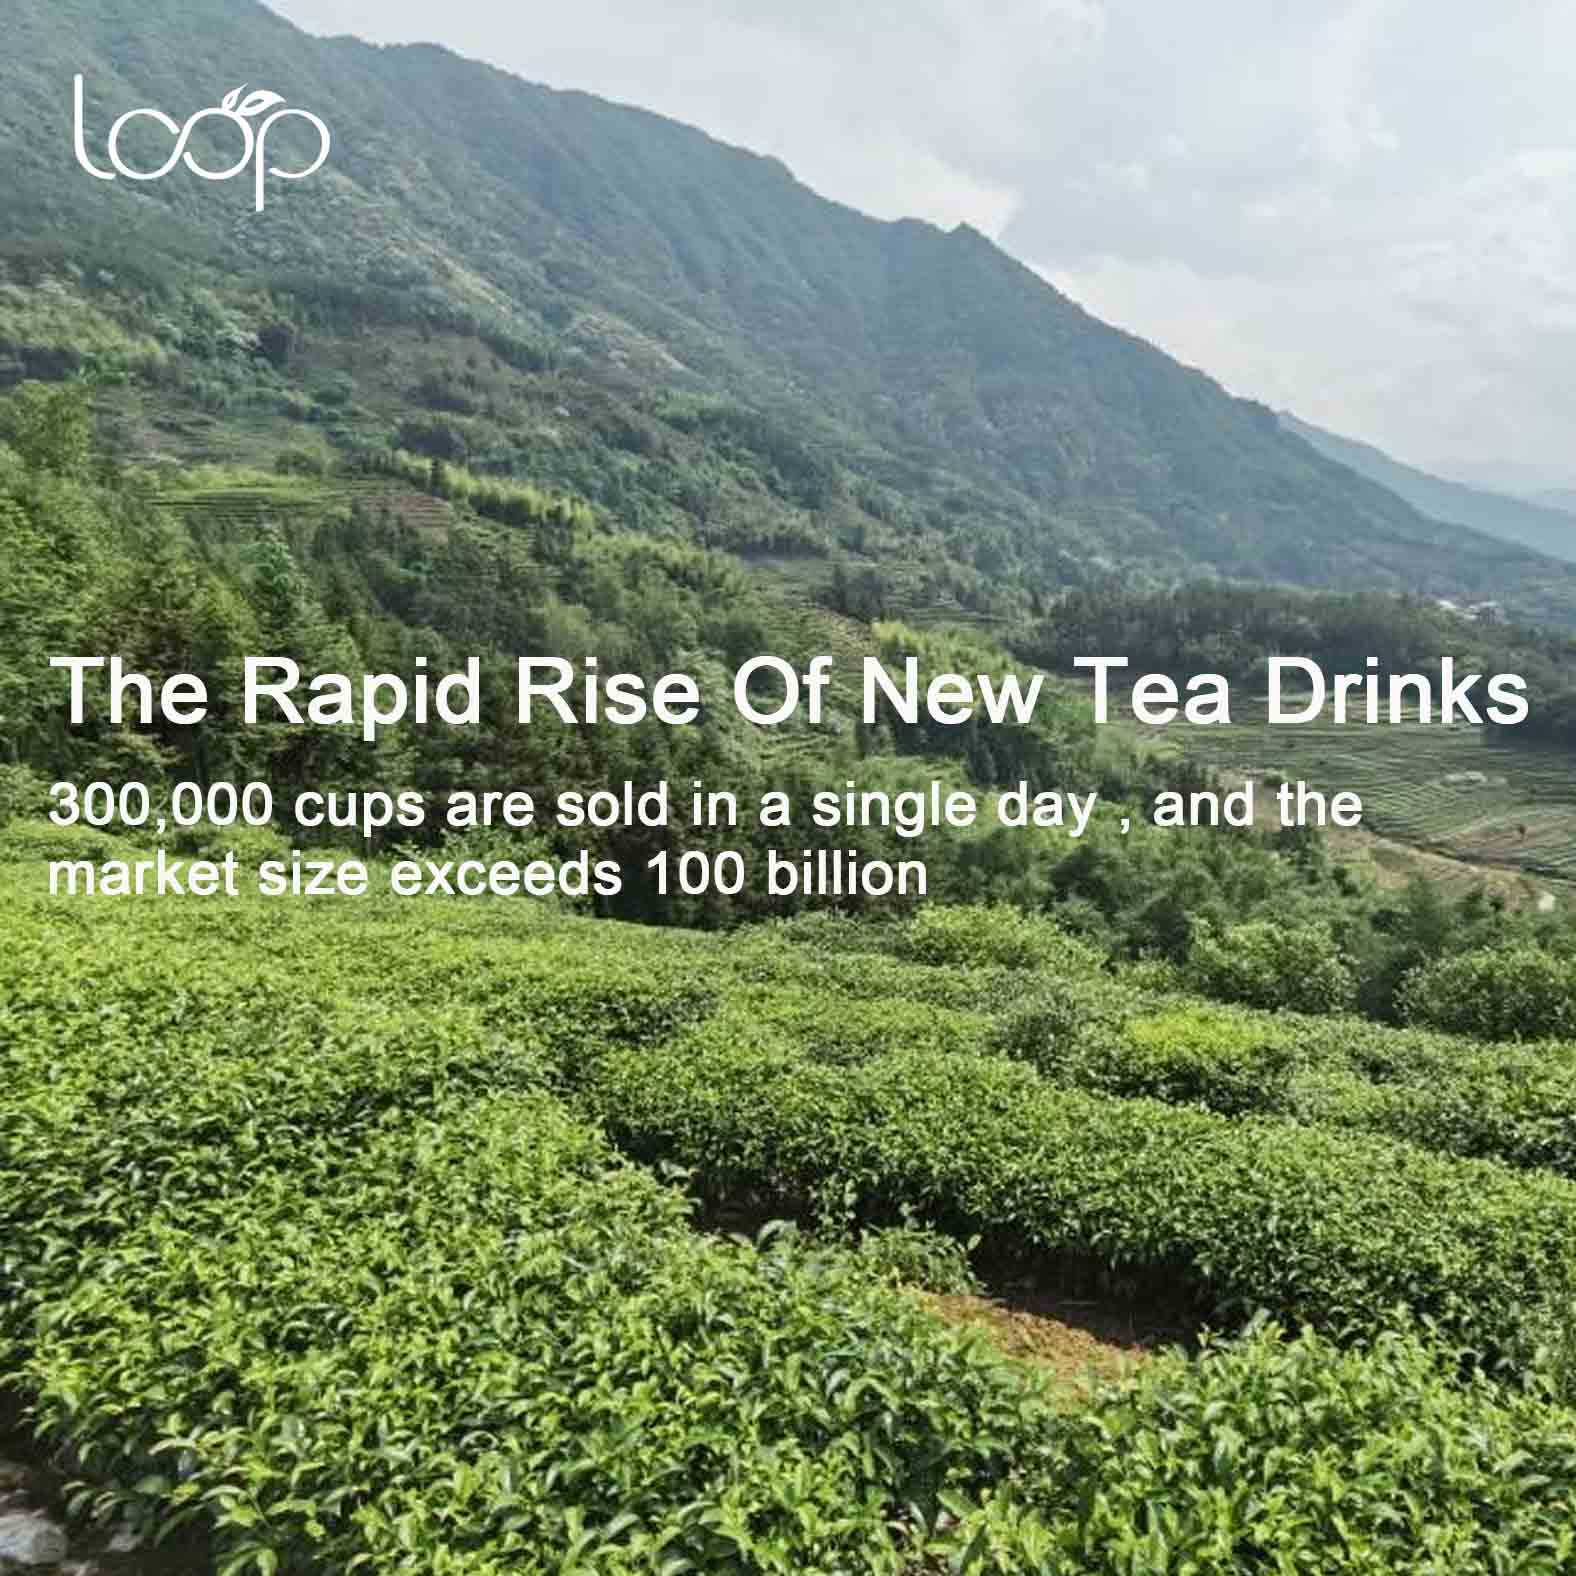 The rapid rise of new tea drinks